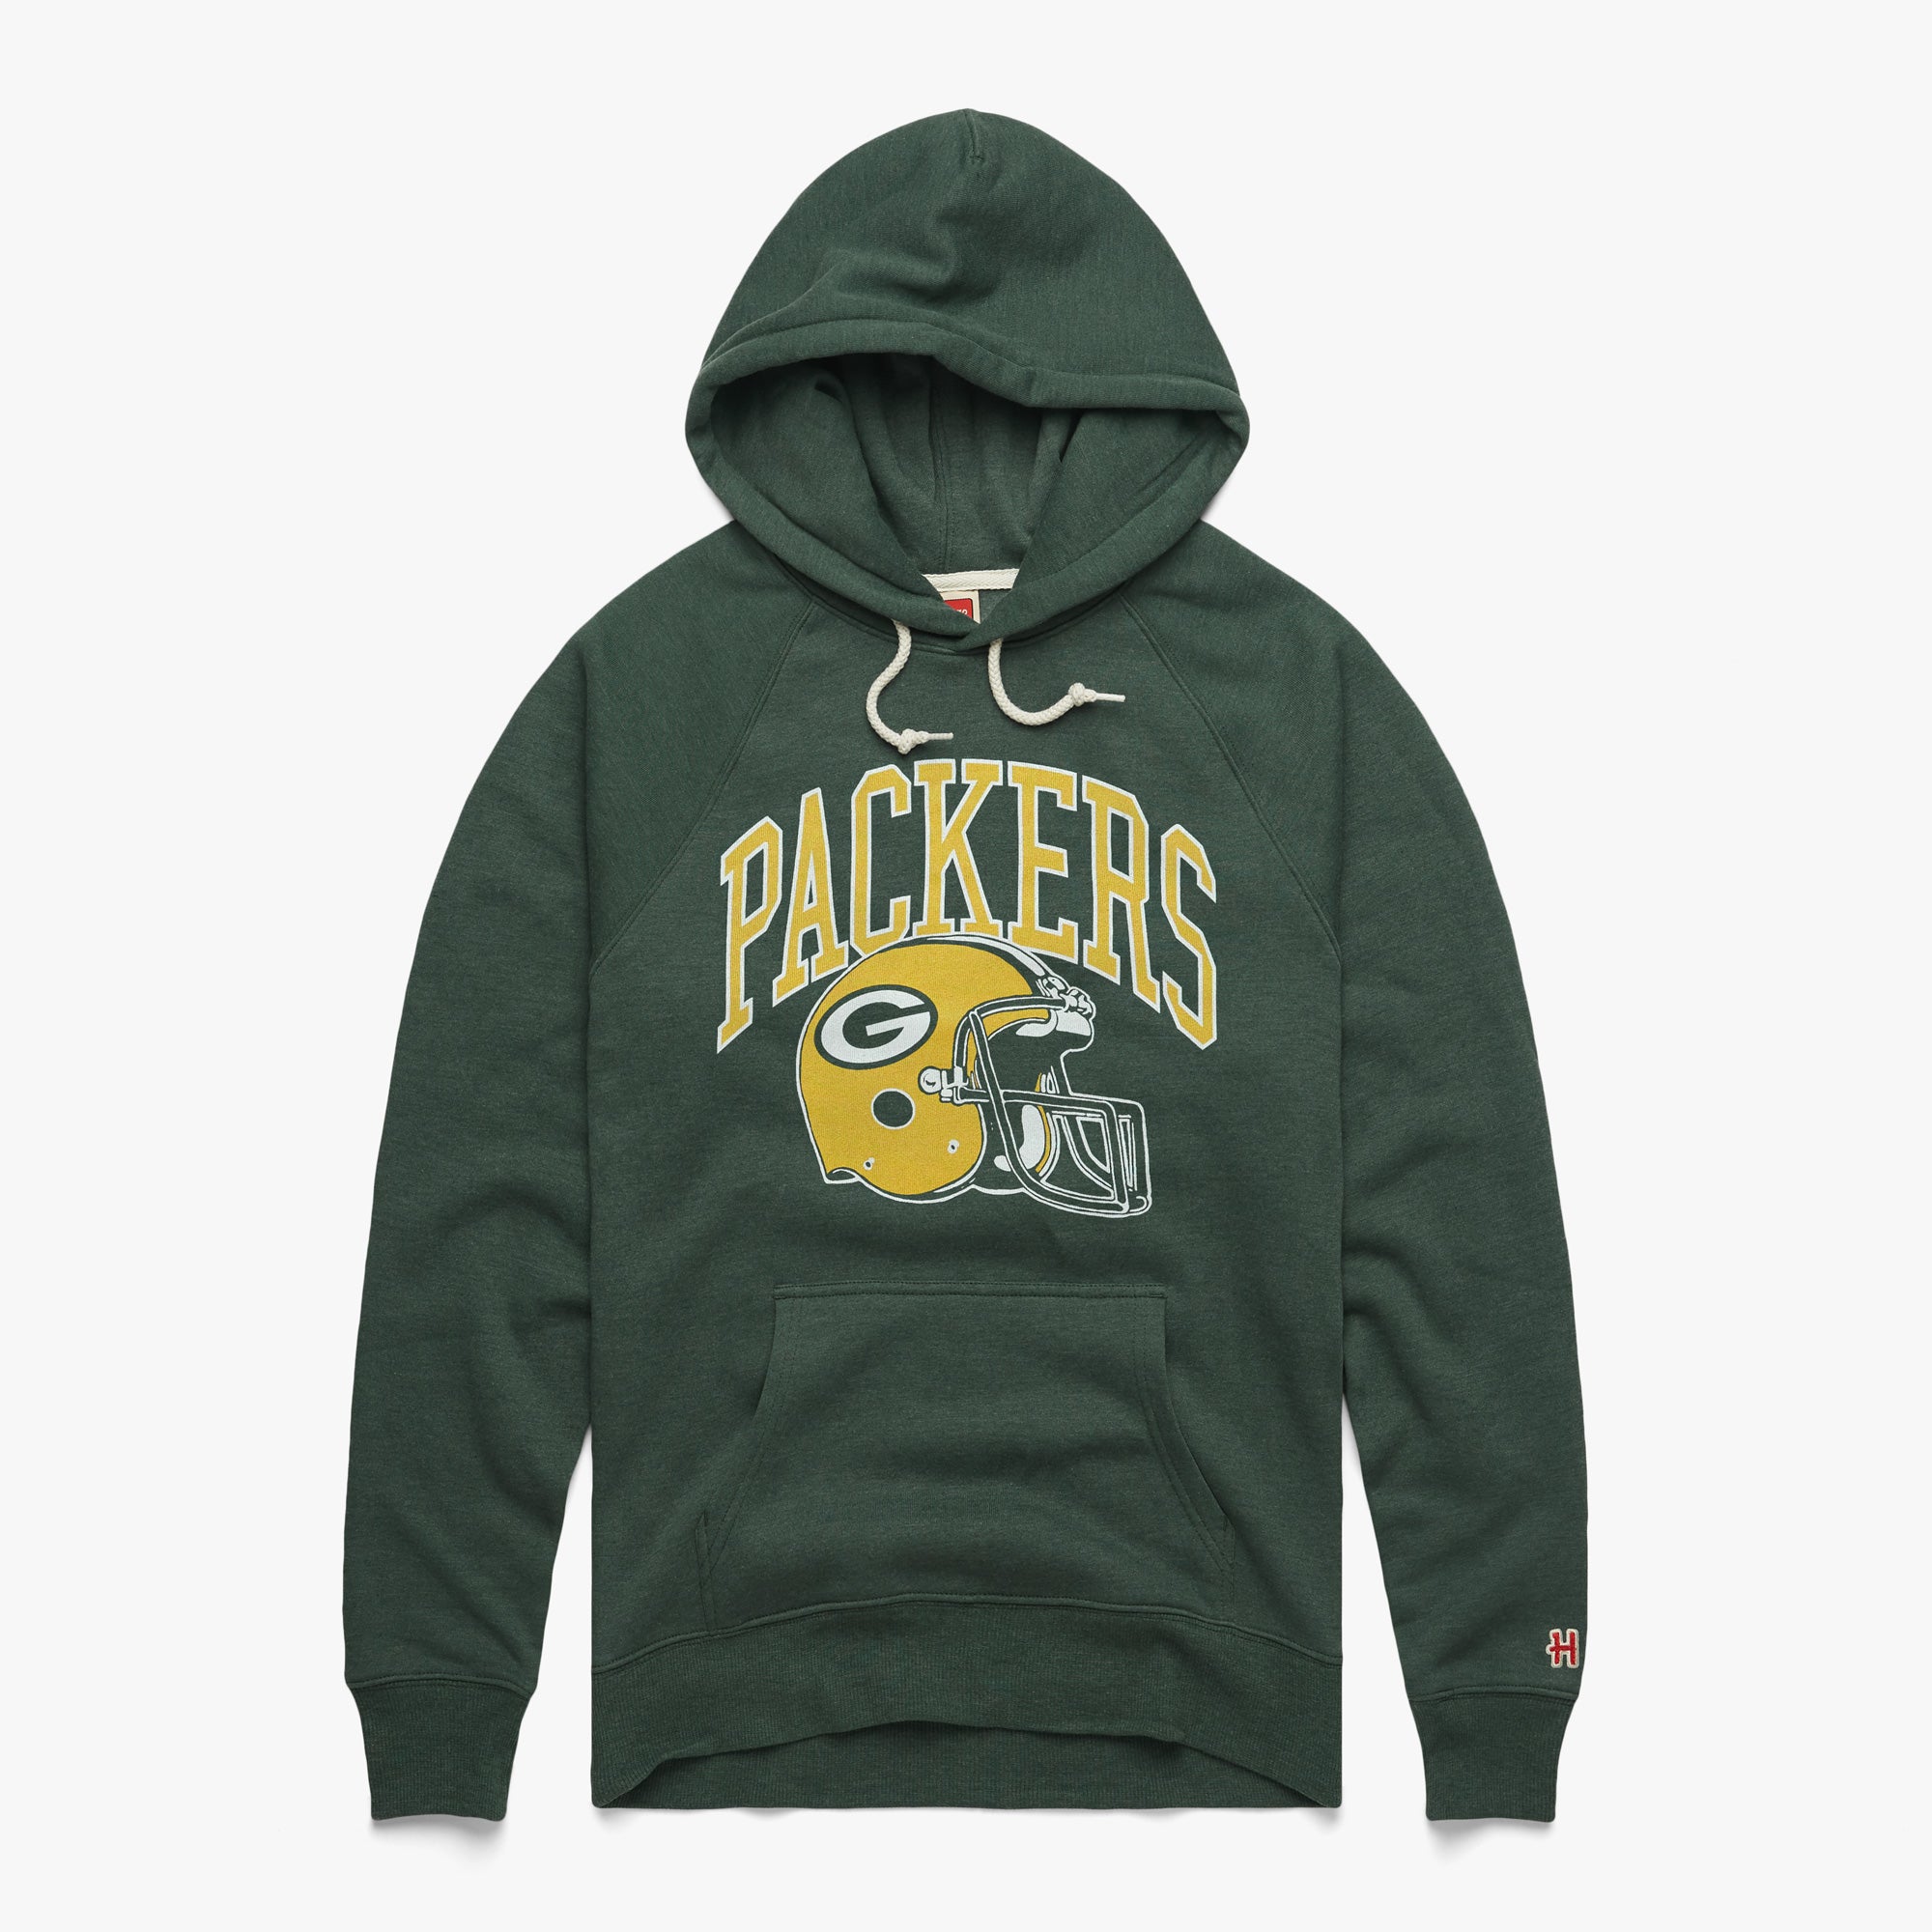 Green Bay Packers Helmet Hoodie from Homage. | Officially Licensed Vintage NFL Apparel from Homage Pro Shop.